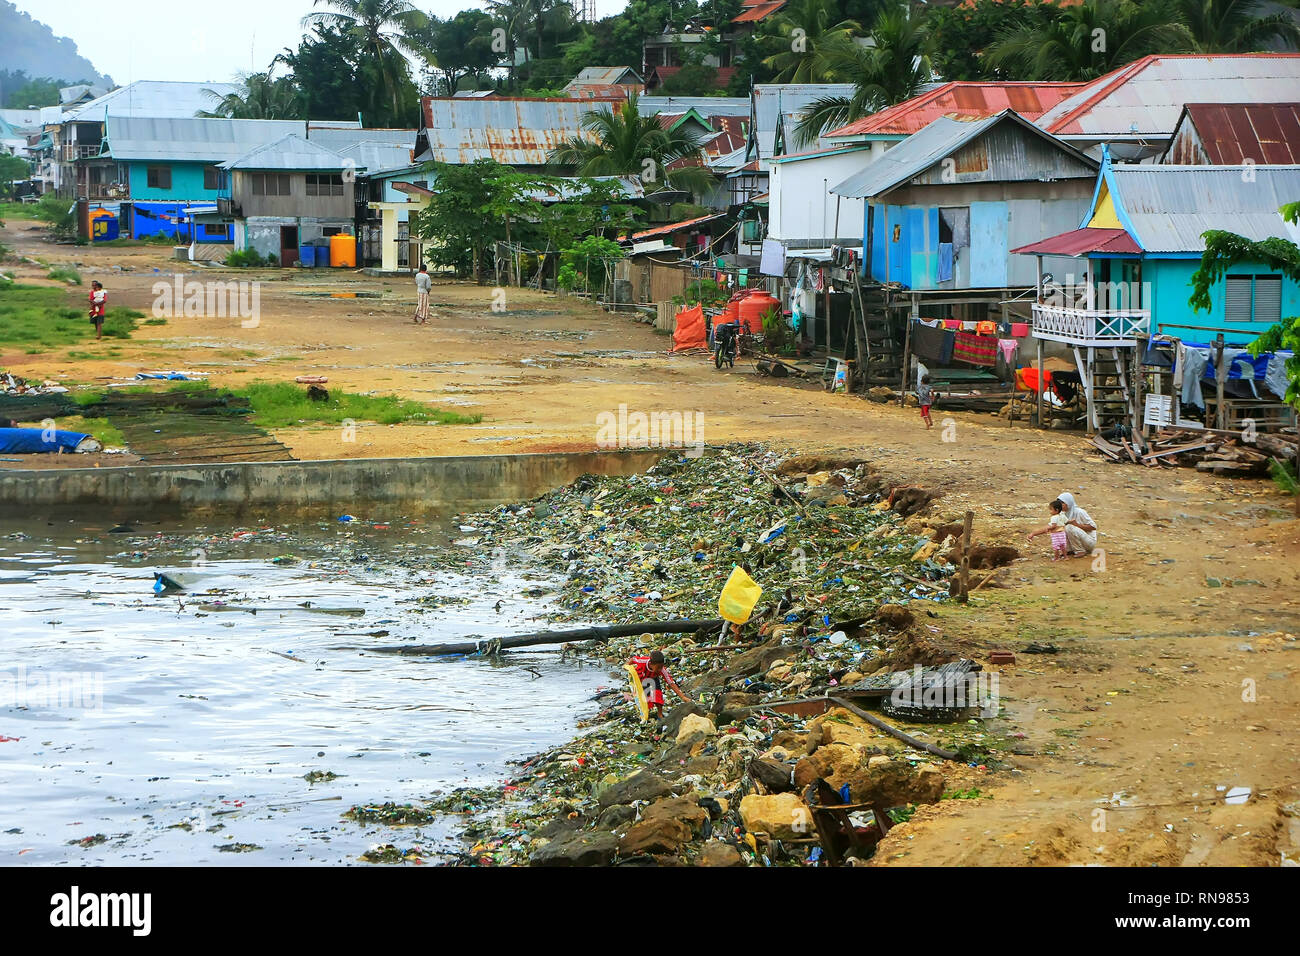 Pile of garbage in the sea at Labuan Bajo town, Flores Island, Nusa Tenggara, Indonesia. The local economy in the town is centered around the ferry po Stock Photo